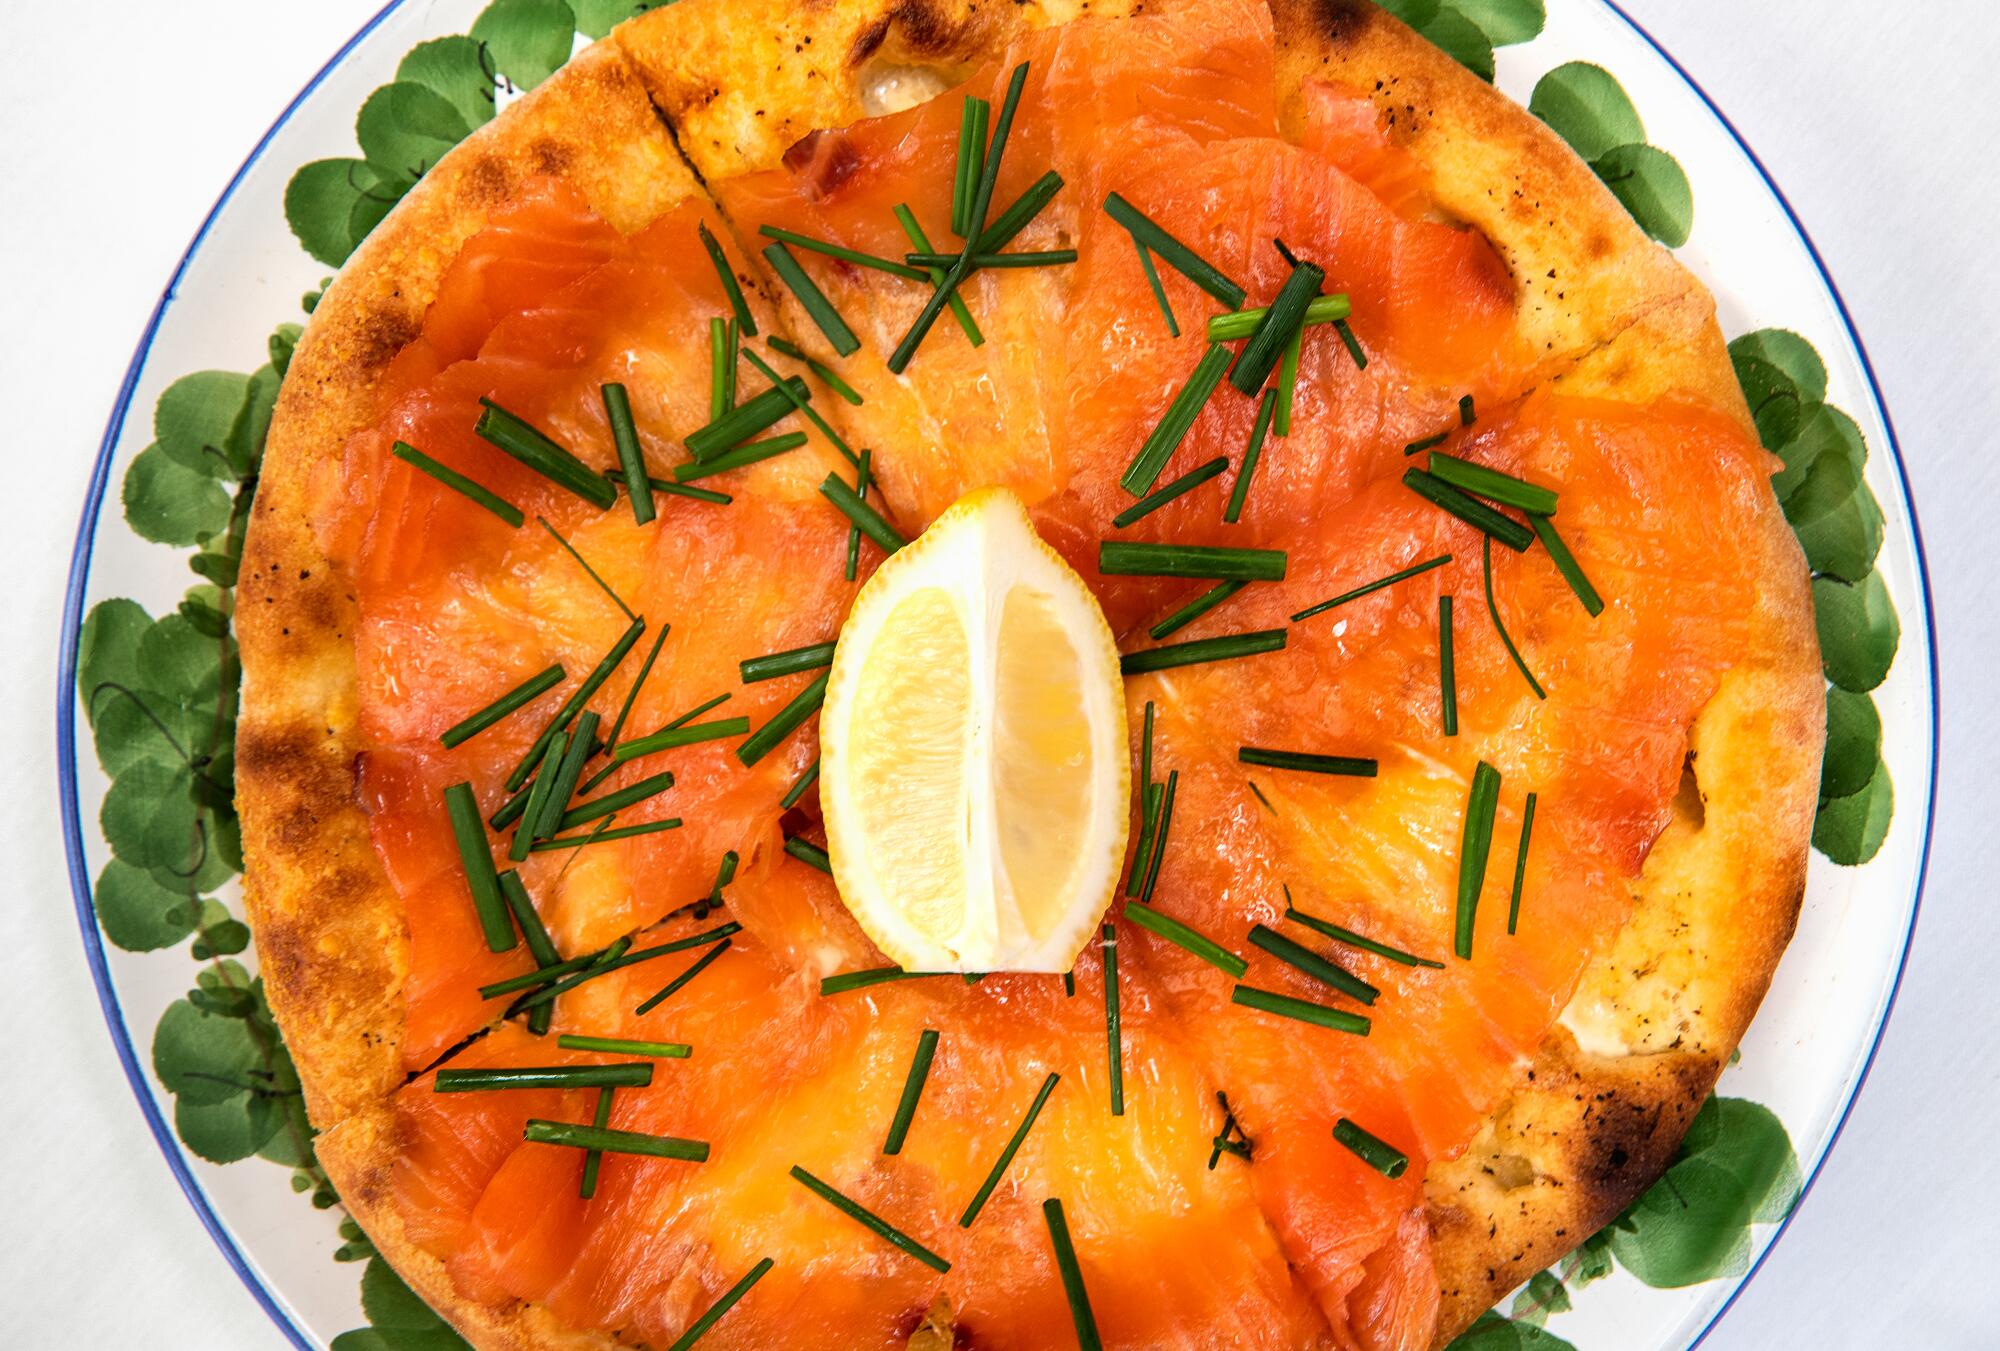 Smoked salmon and creme fraiche pizza. But is it better than Wolfgang Puck's?